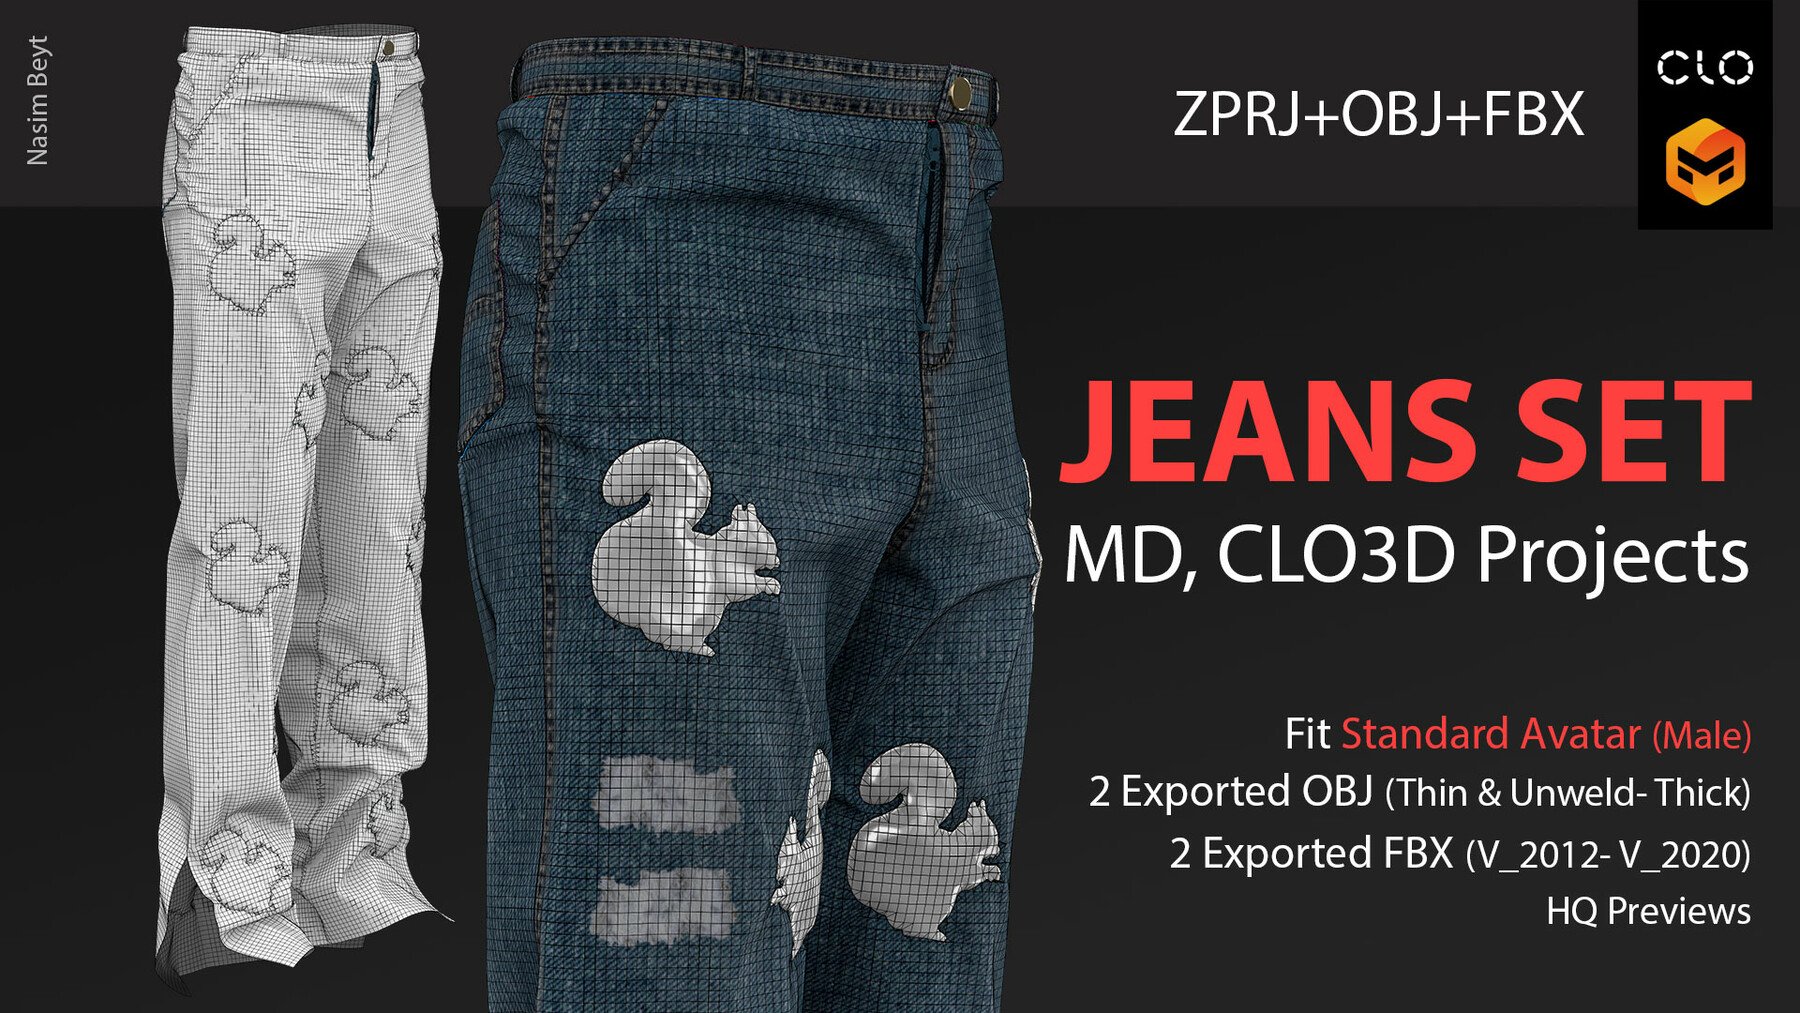 ArtStation - 3 Different Female Jeans Sets (VOL 01) with Texture. CLO3D, MD  PROJECTS+OBJ+FBX